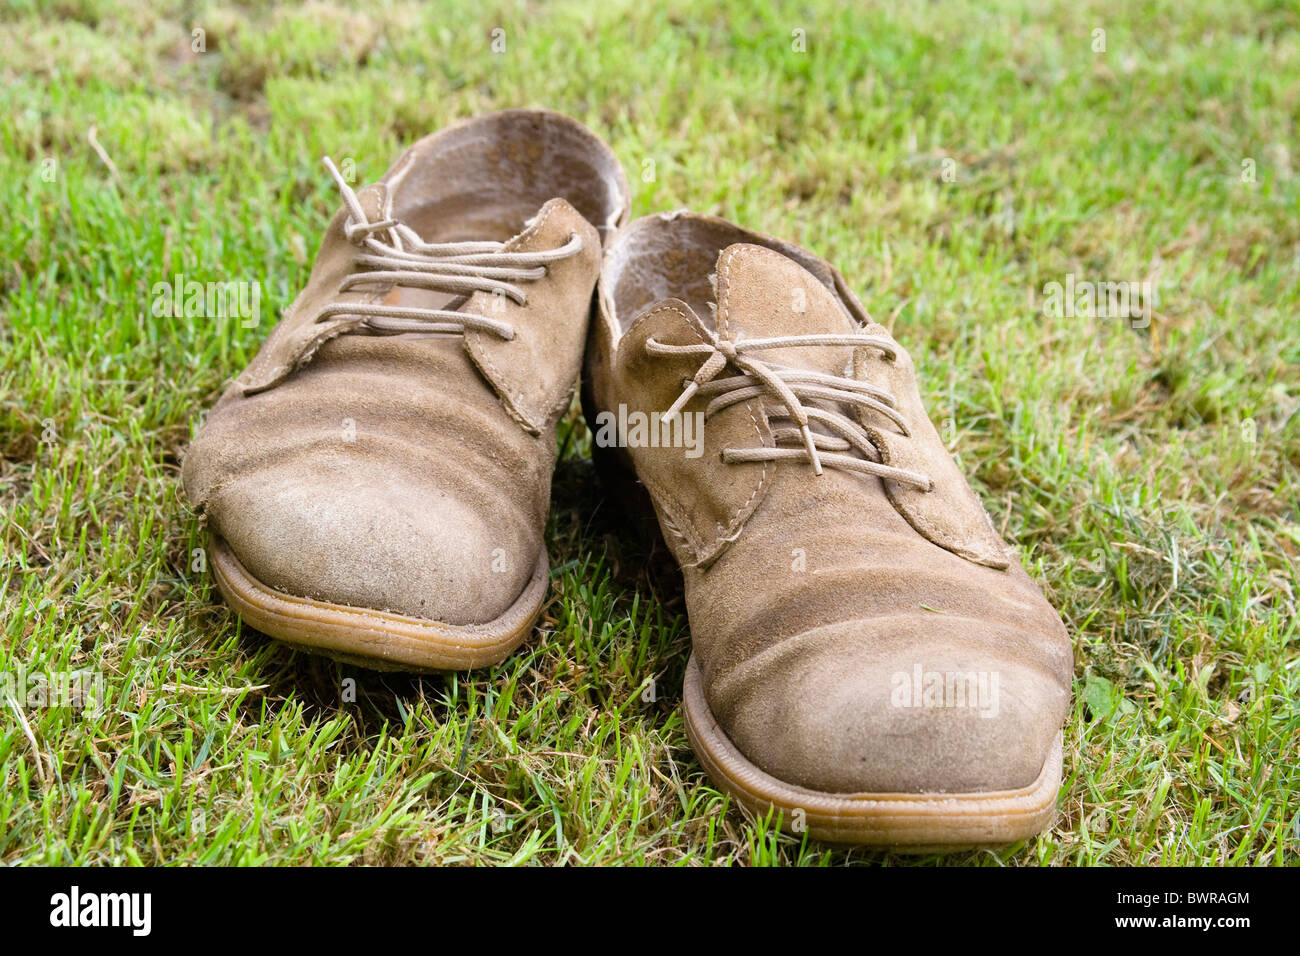 old shoes meadow leather worn worn-out outside outdoors pair detail wearing Stock Photo